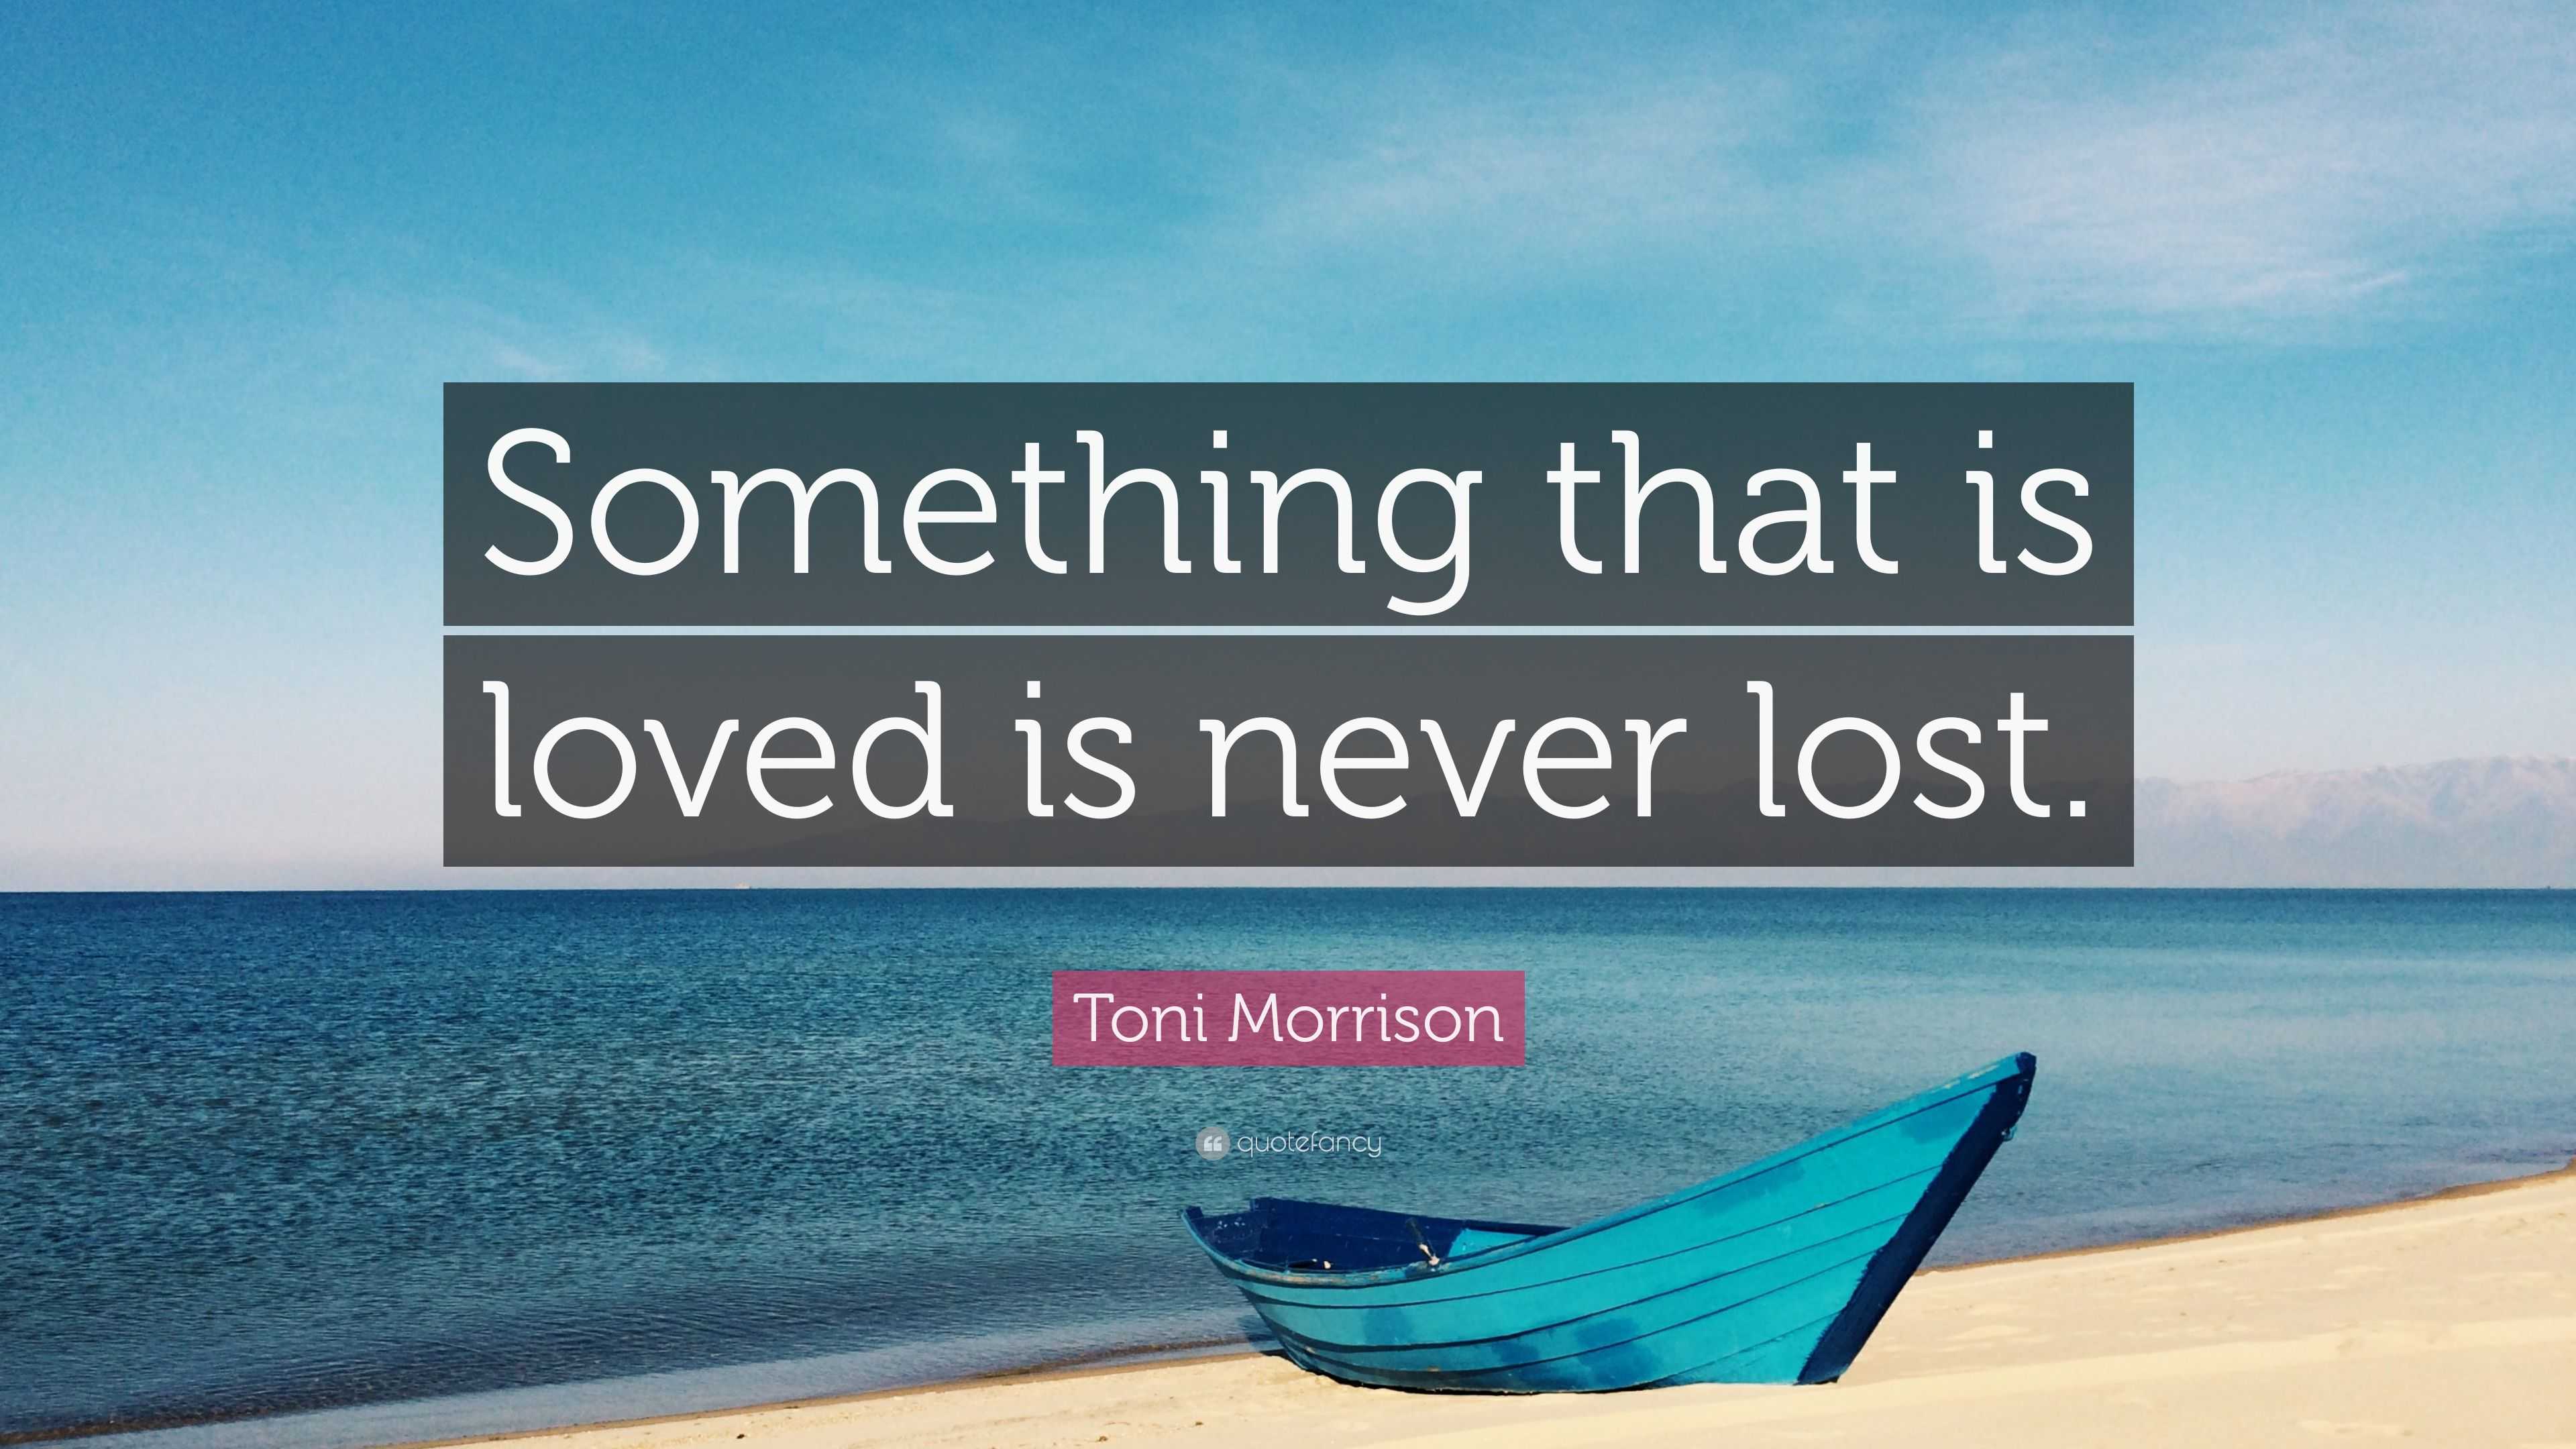 Toni Morrison Quote: “Something that is loved is never lost.”